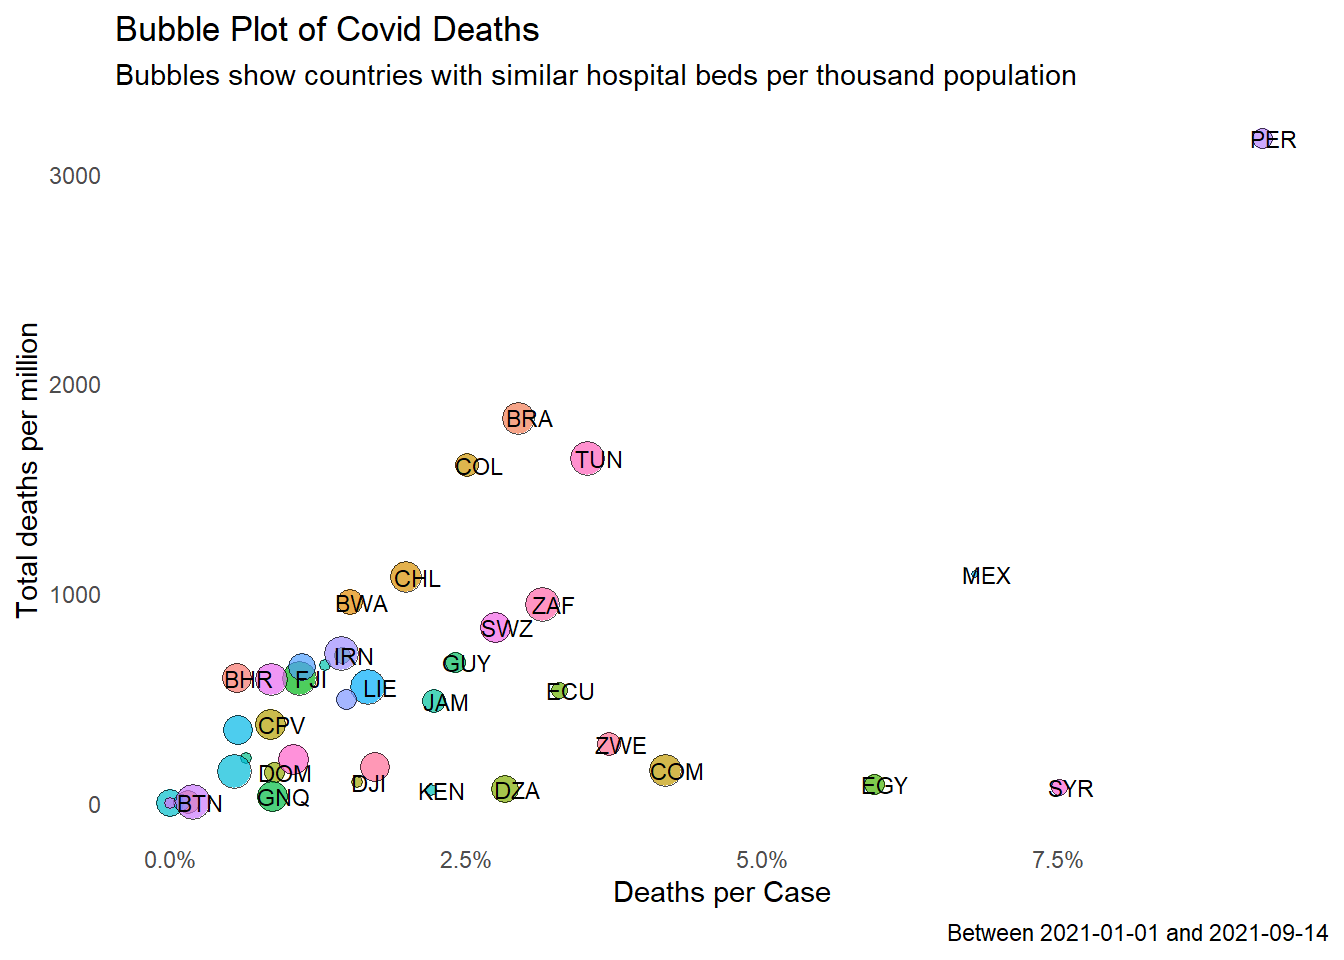 Bubble plot of selected Covid metrics for countries with similar number of hospital beds per thousand